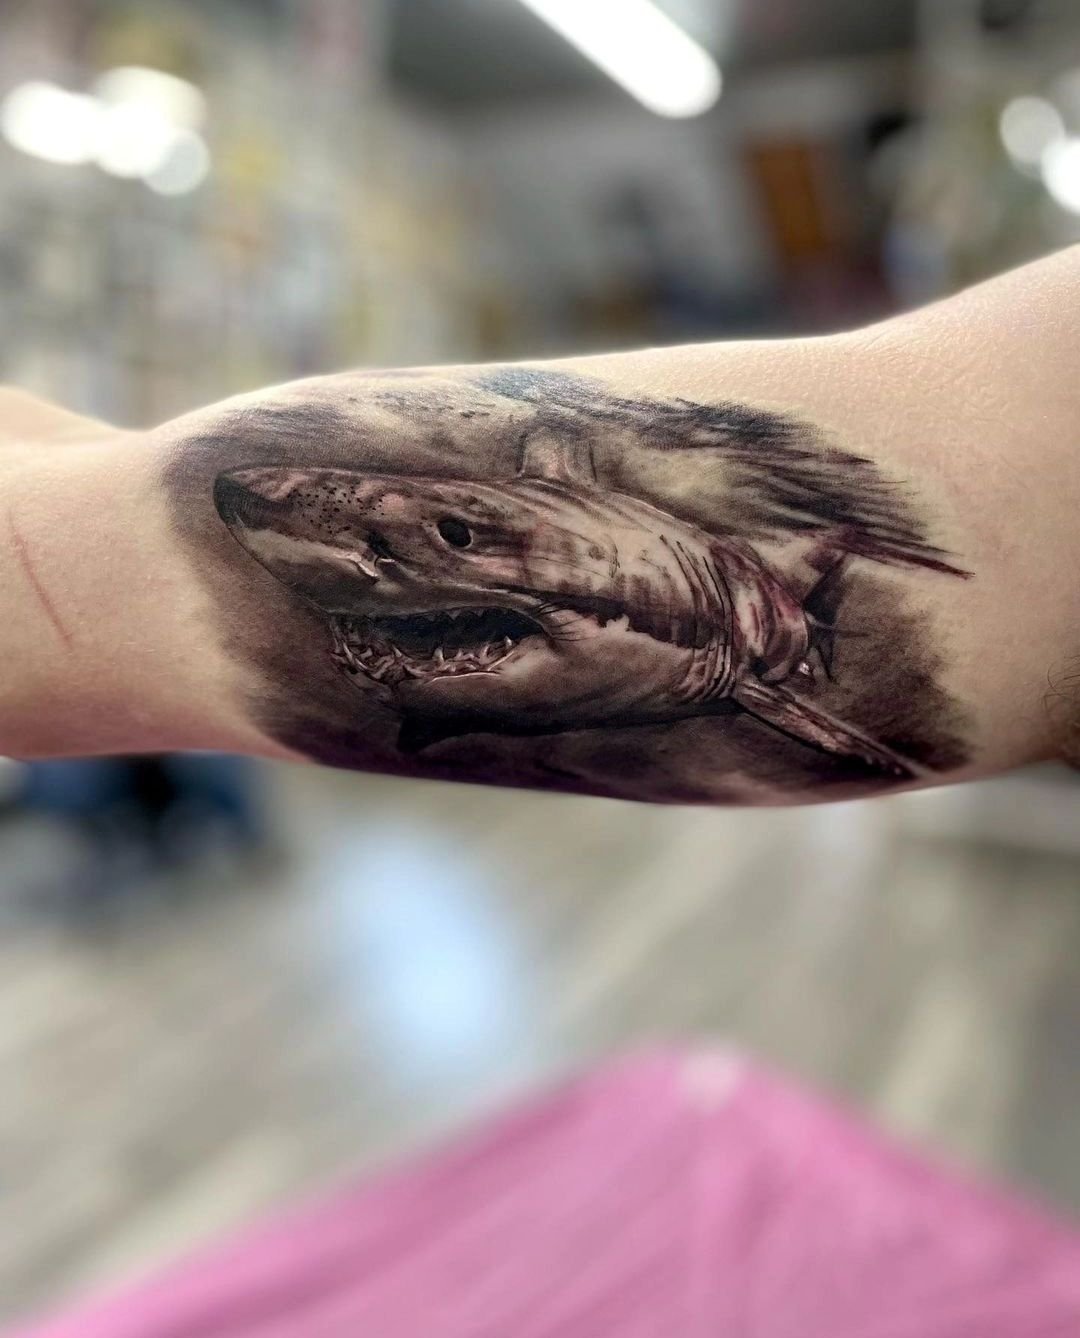 Great white shark for this client's first tattoo 👀 done by @cashusclay35_ 

#shreveporttattooartist #louisianatattooartist #sharktattoo #greatwhiteshark